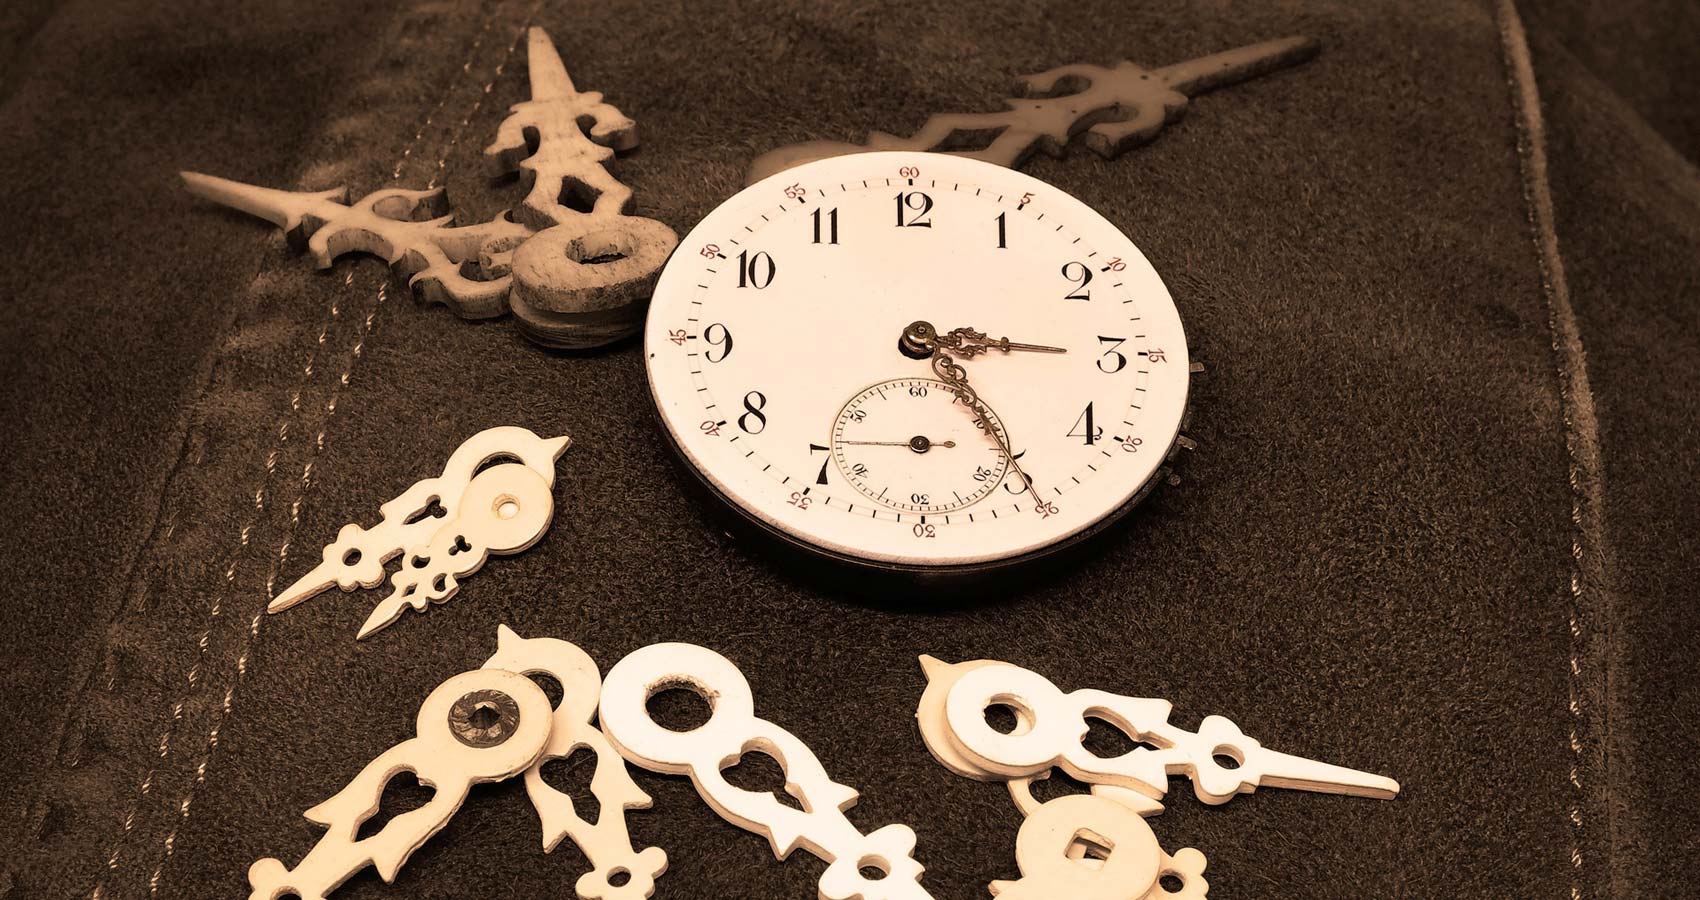 Thief Of Time, a poem written by TM DiSarro at Spillwords.com